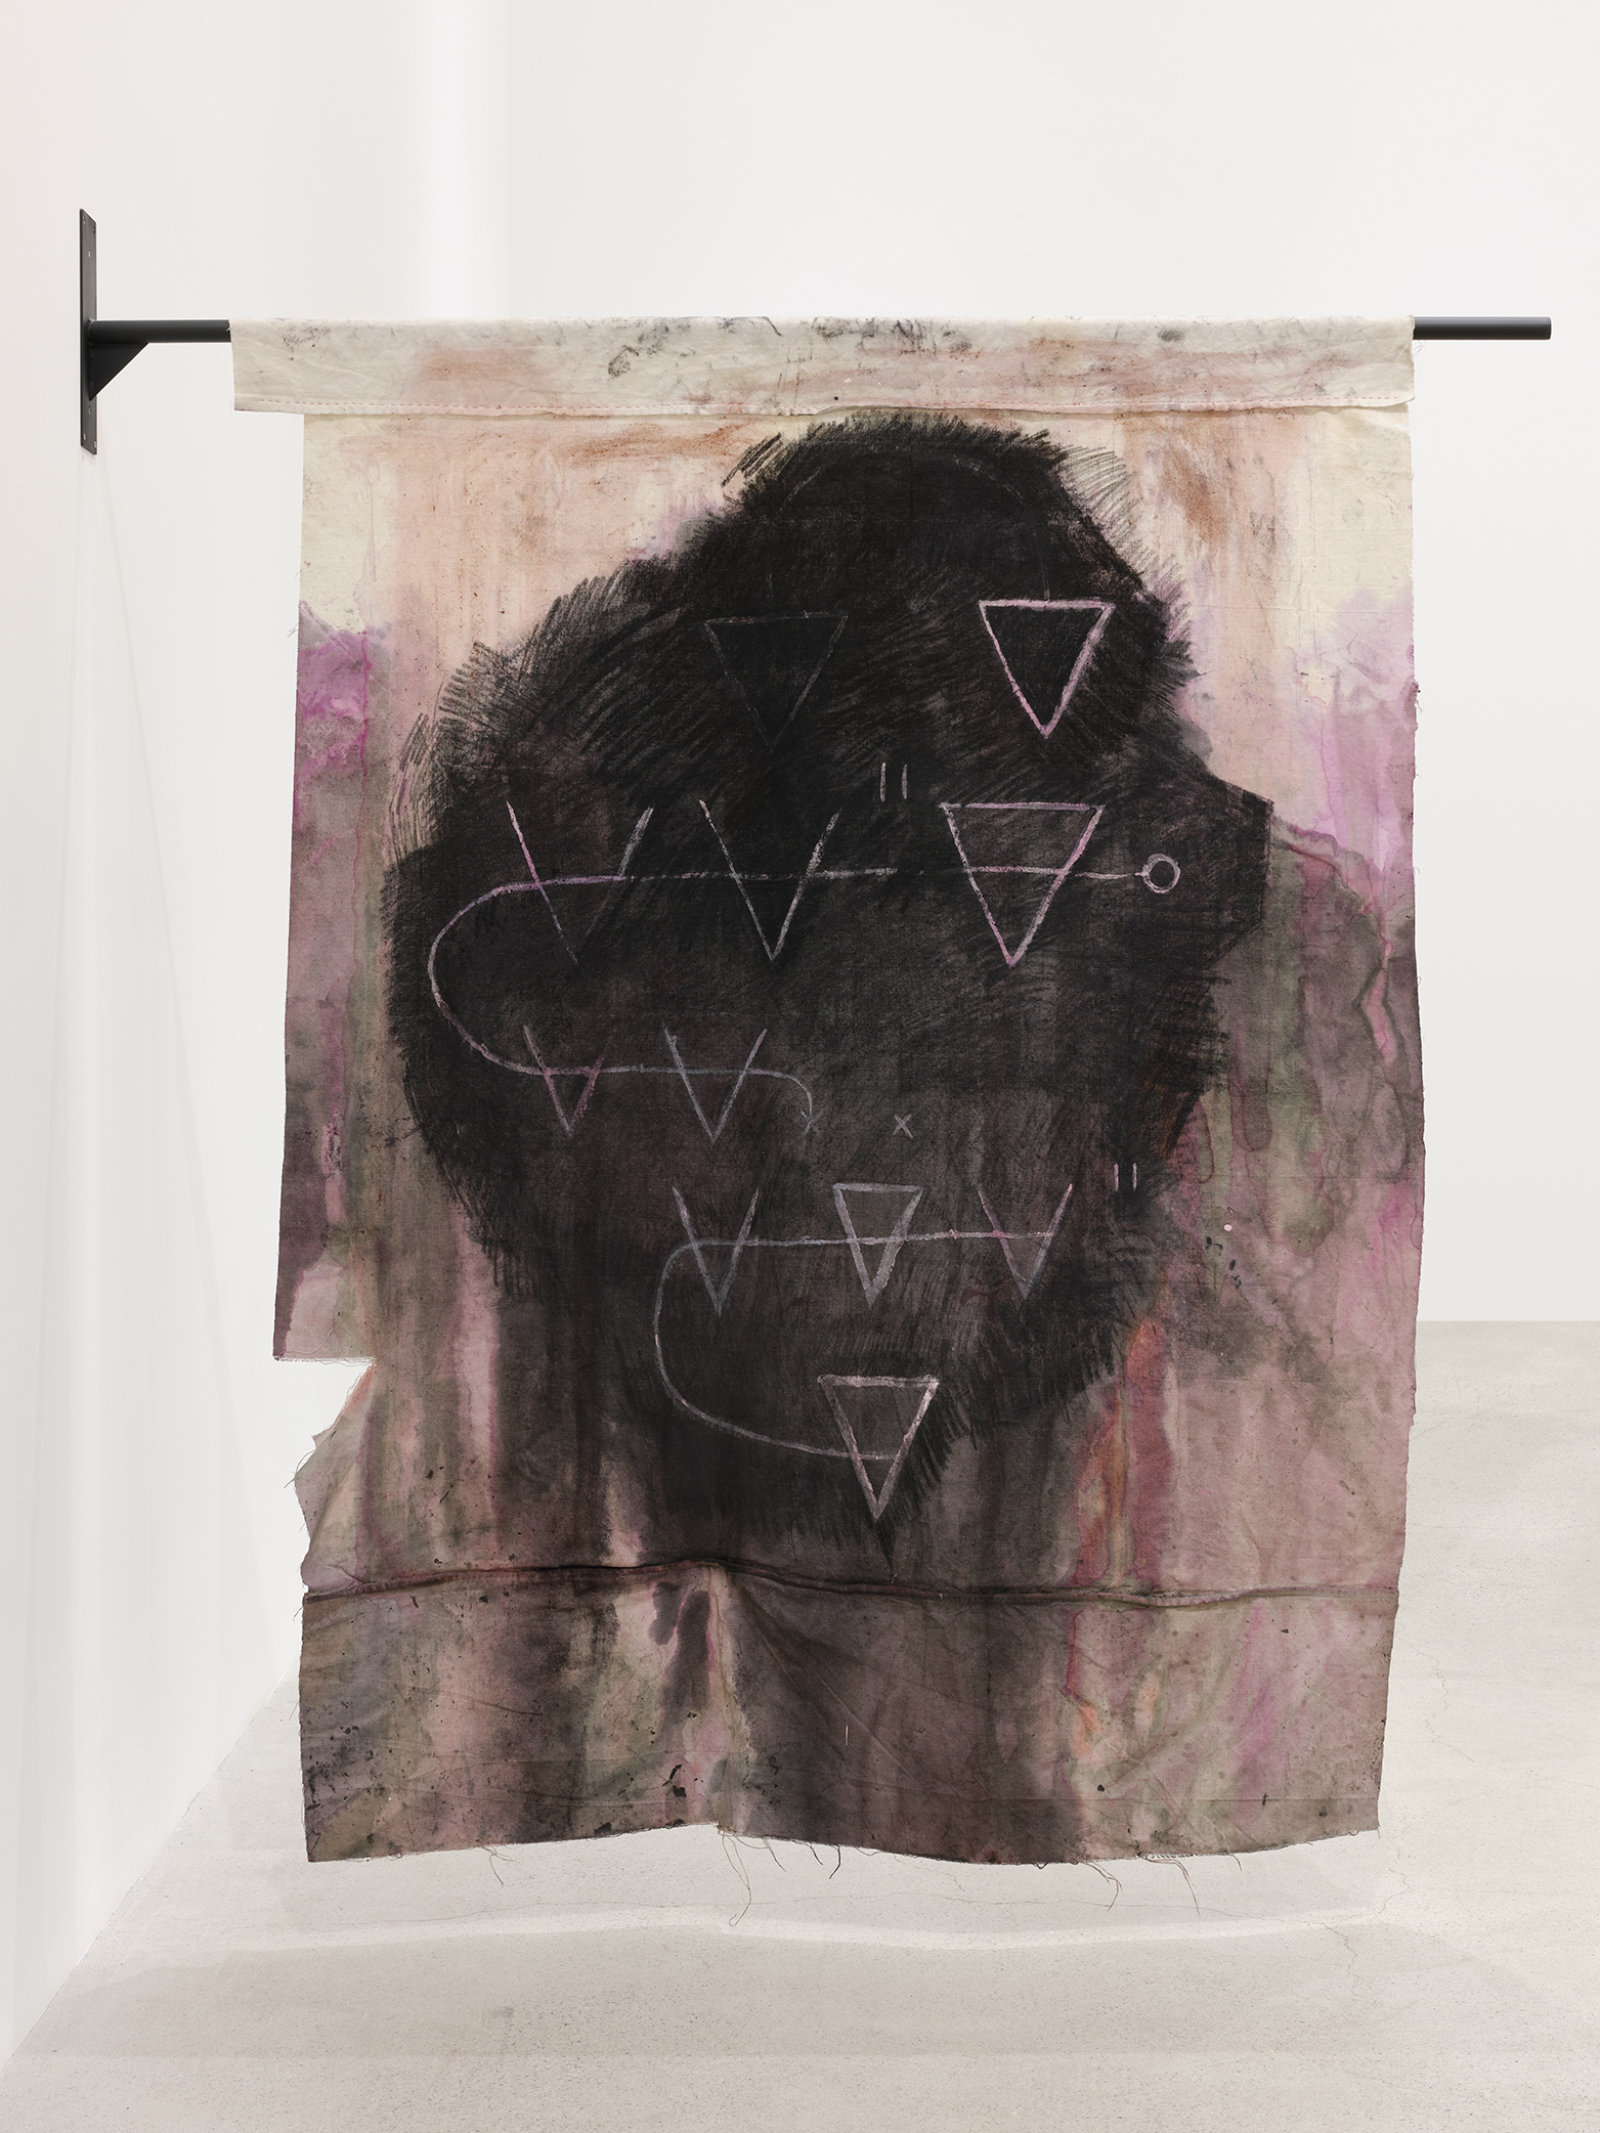 Duane Linklater, score for the back of my head, 2021, canvas, sumac, cochineal dye, charcoal, house paint, cotton thread, steel, 76 x 58 x 5 in. (193 x 147 x 13 cm)